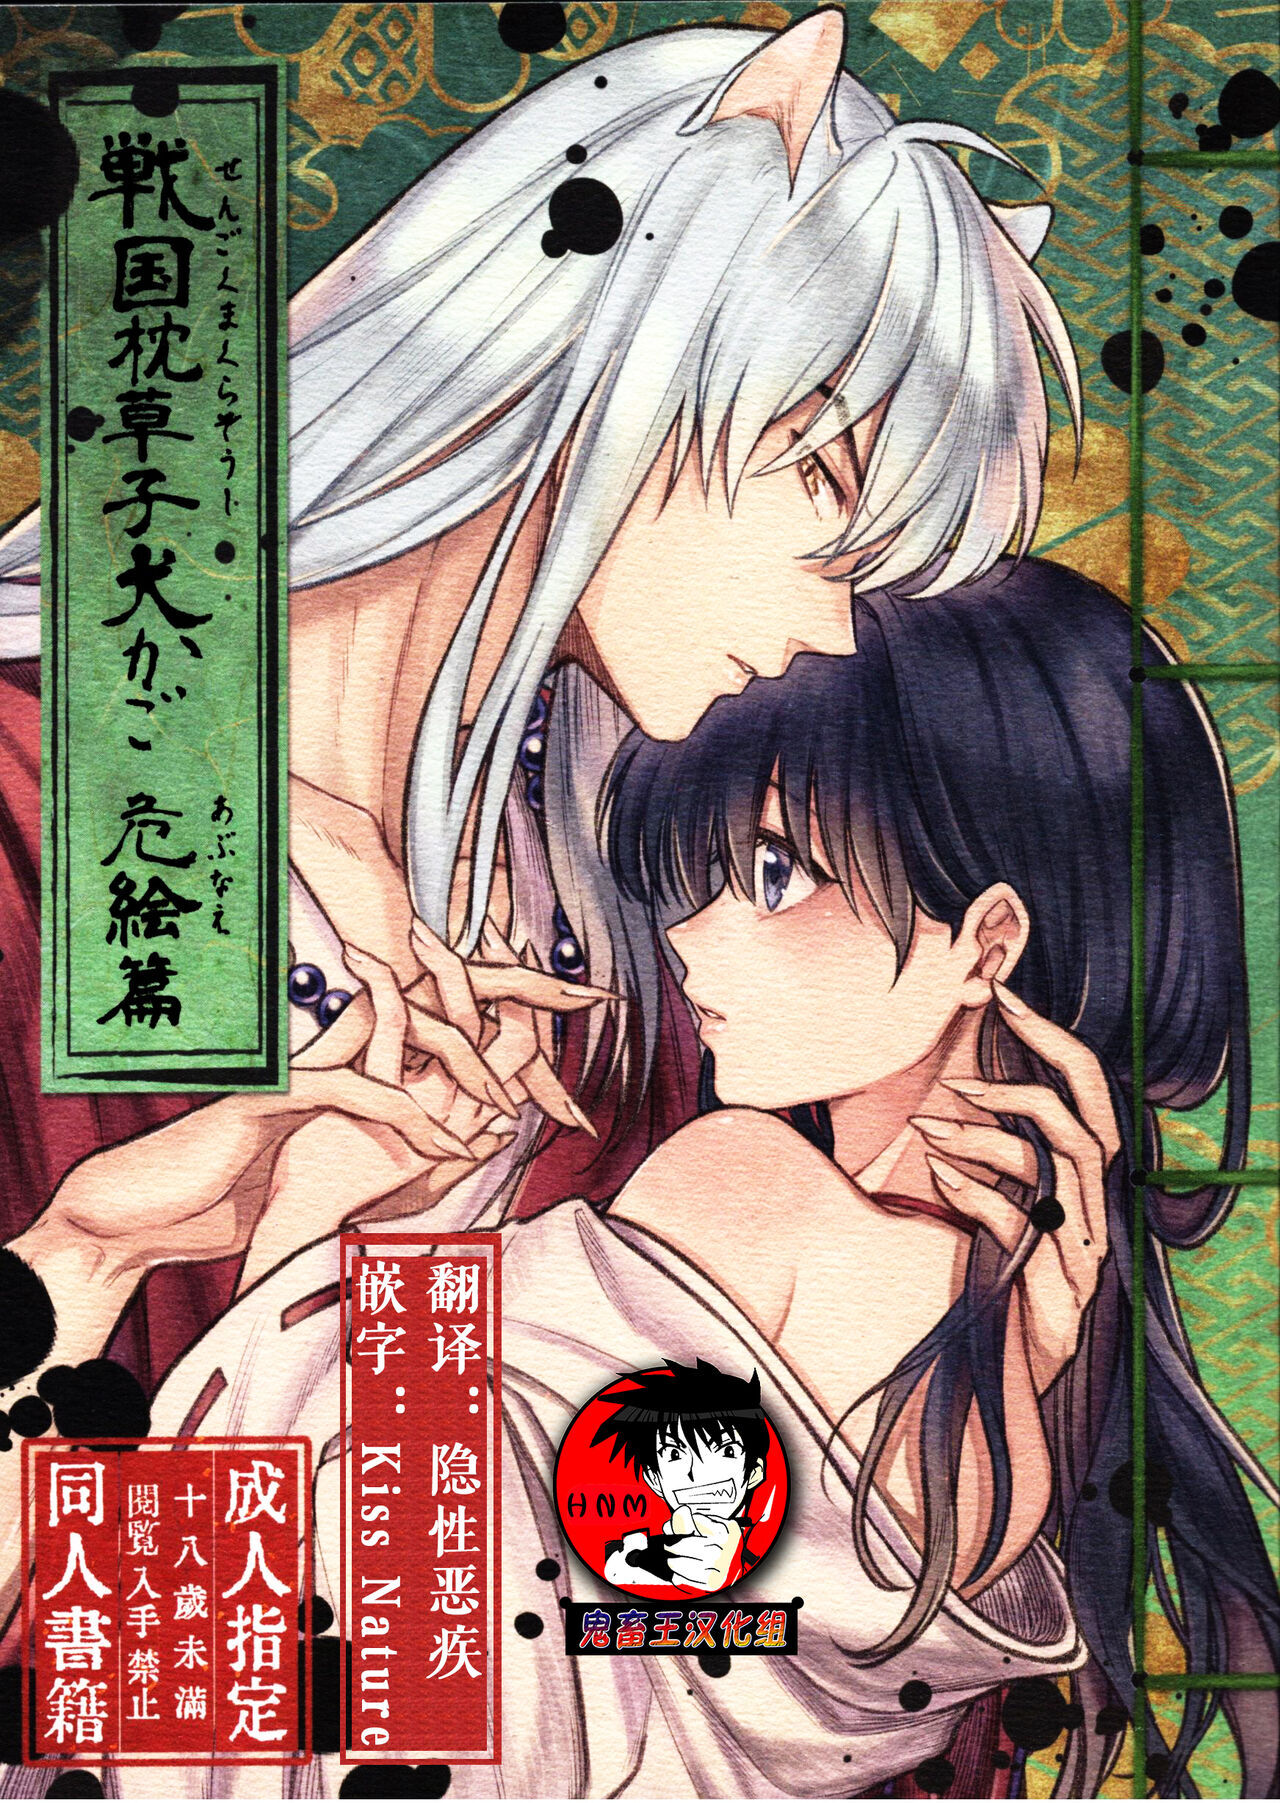 Sexy Inuyasha - Inuyasha - sorted by number of objects - Free Hentai